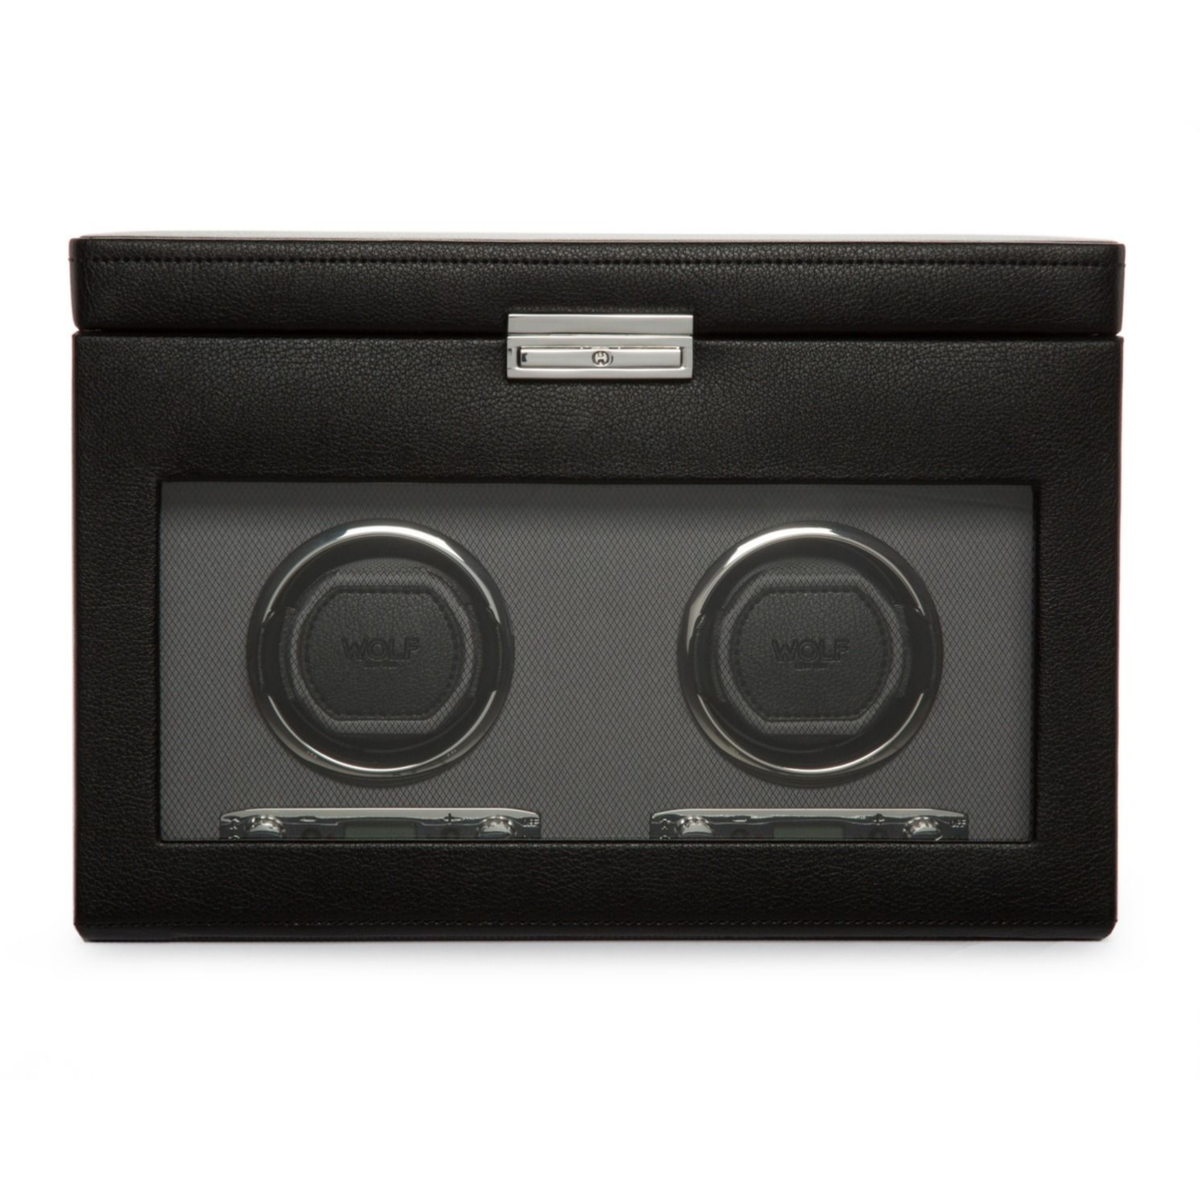 WOLF VICEROY DOUBLE WATCH WINDER WITH STORAGE - BLACK*